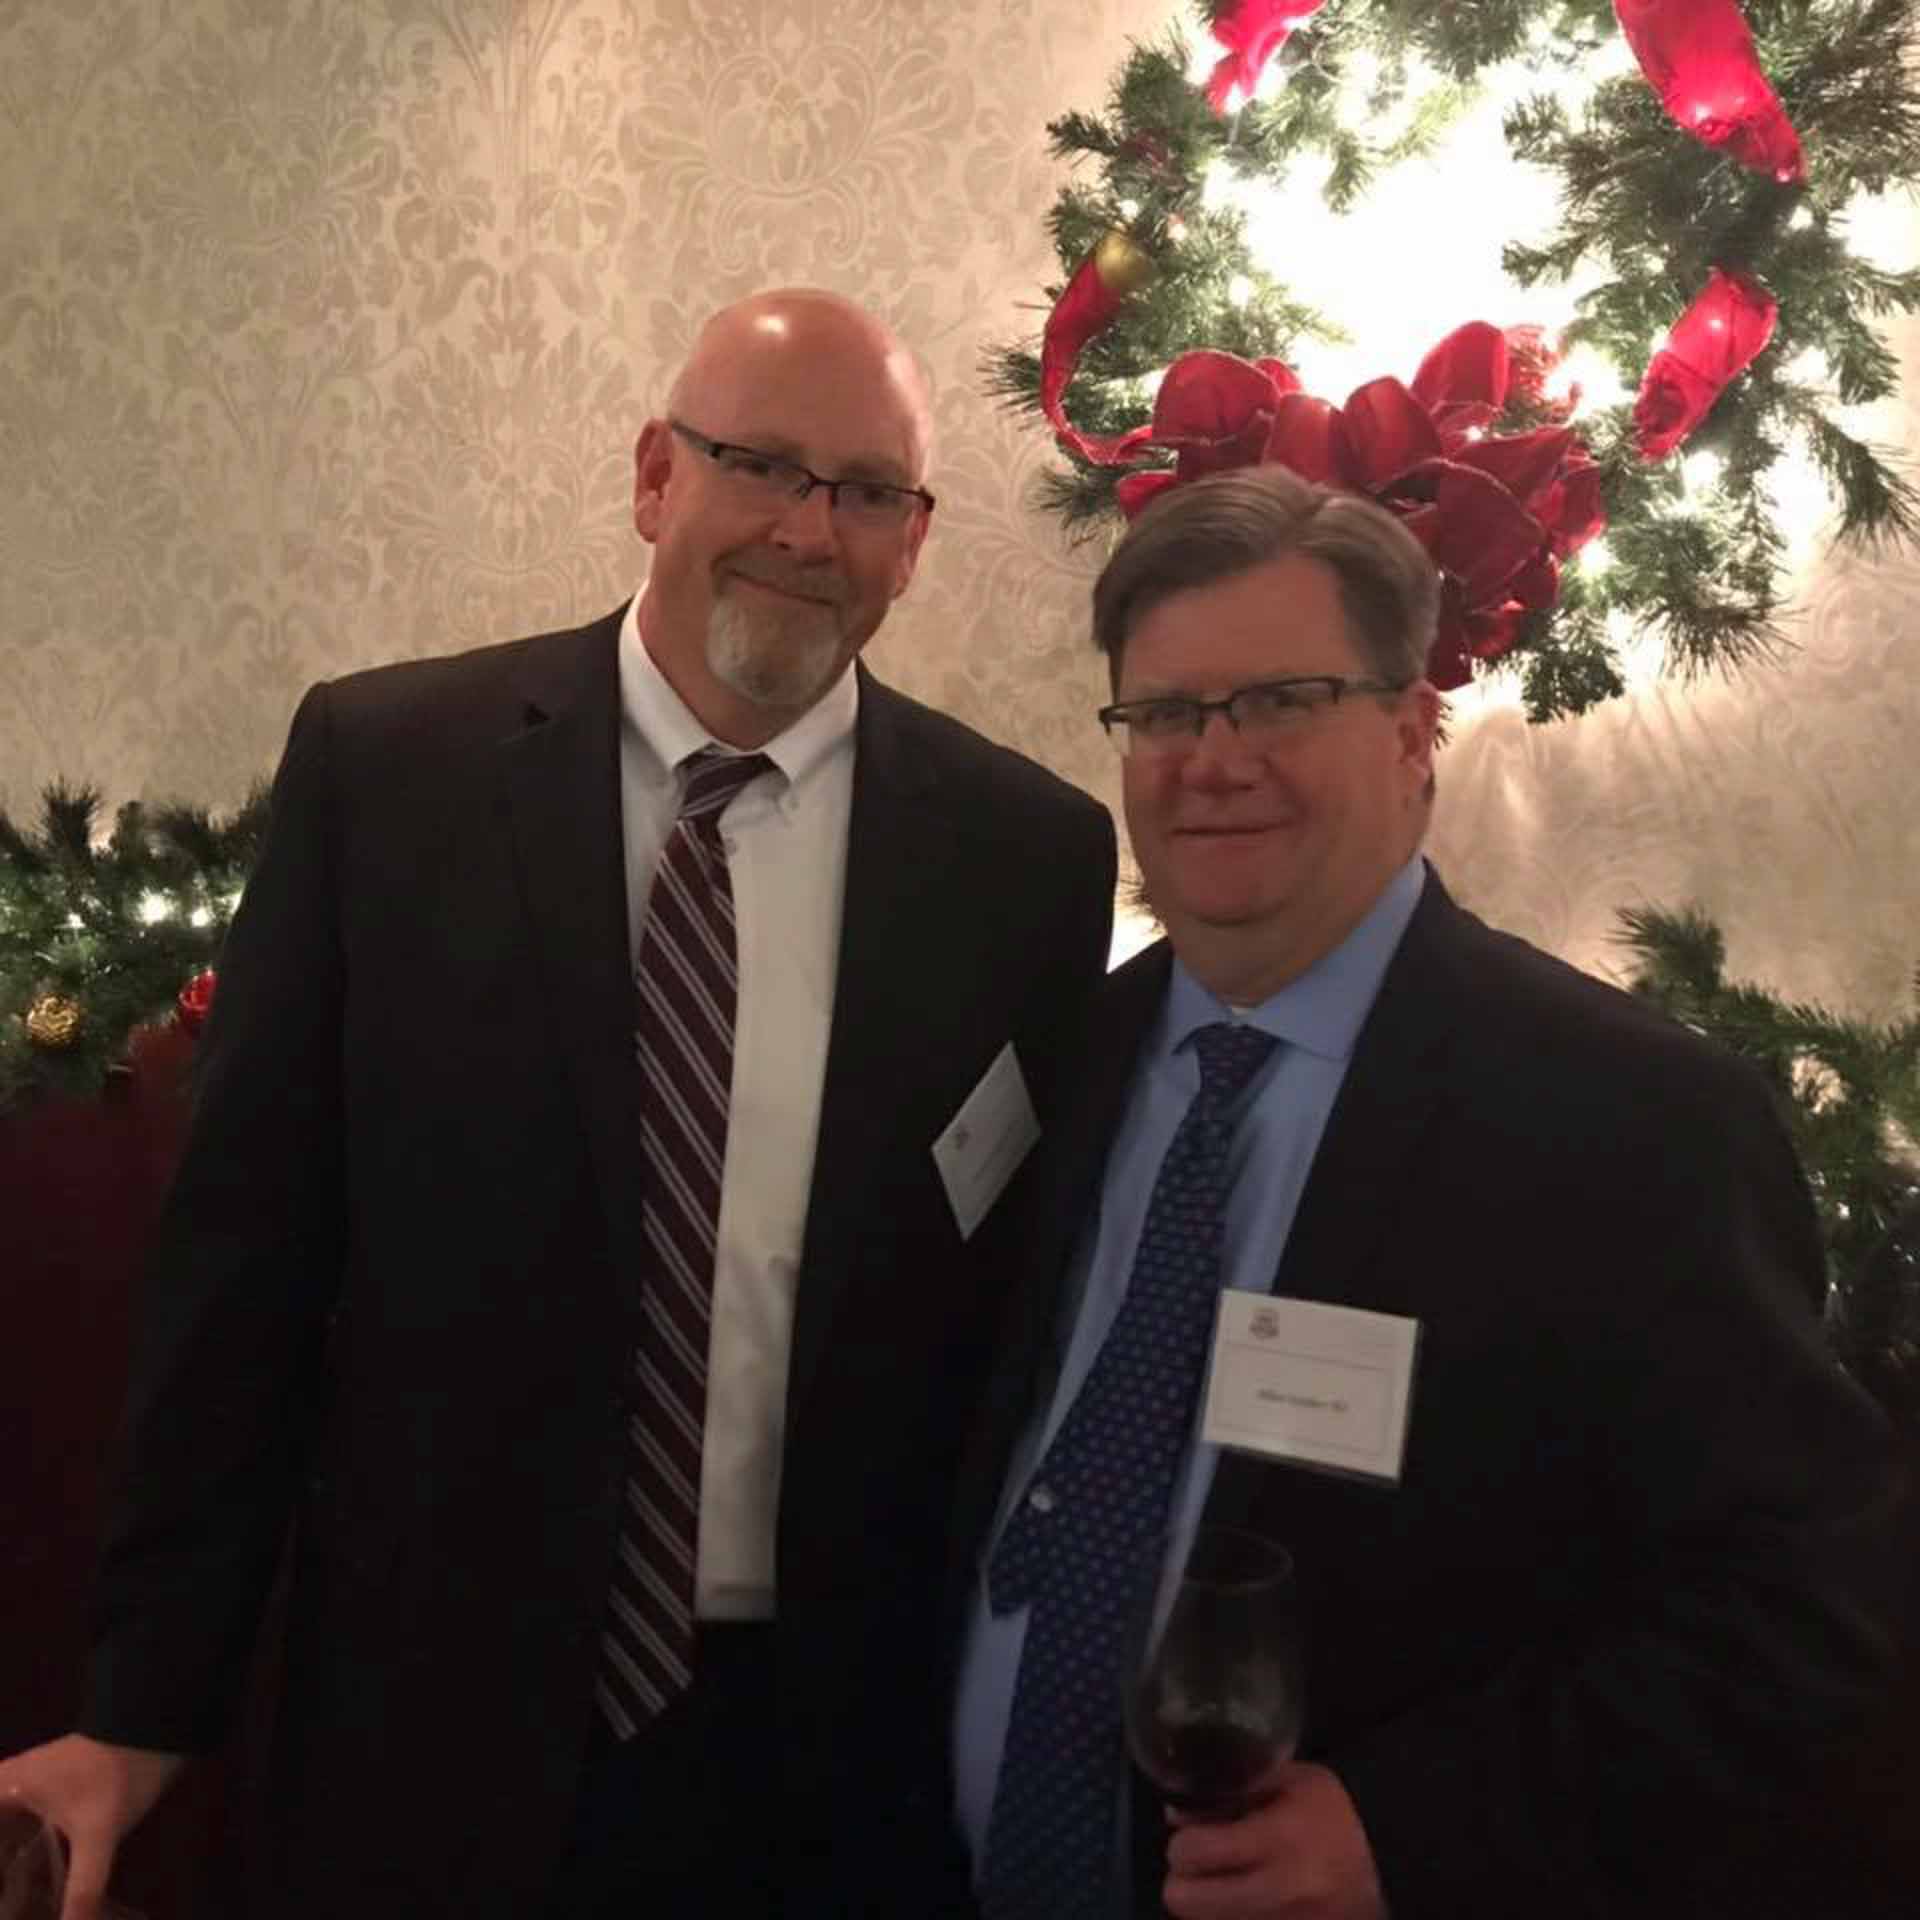 law-association-christmas-social-2019-two-people-smile-in-front-of-reef